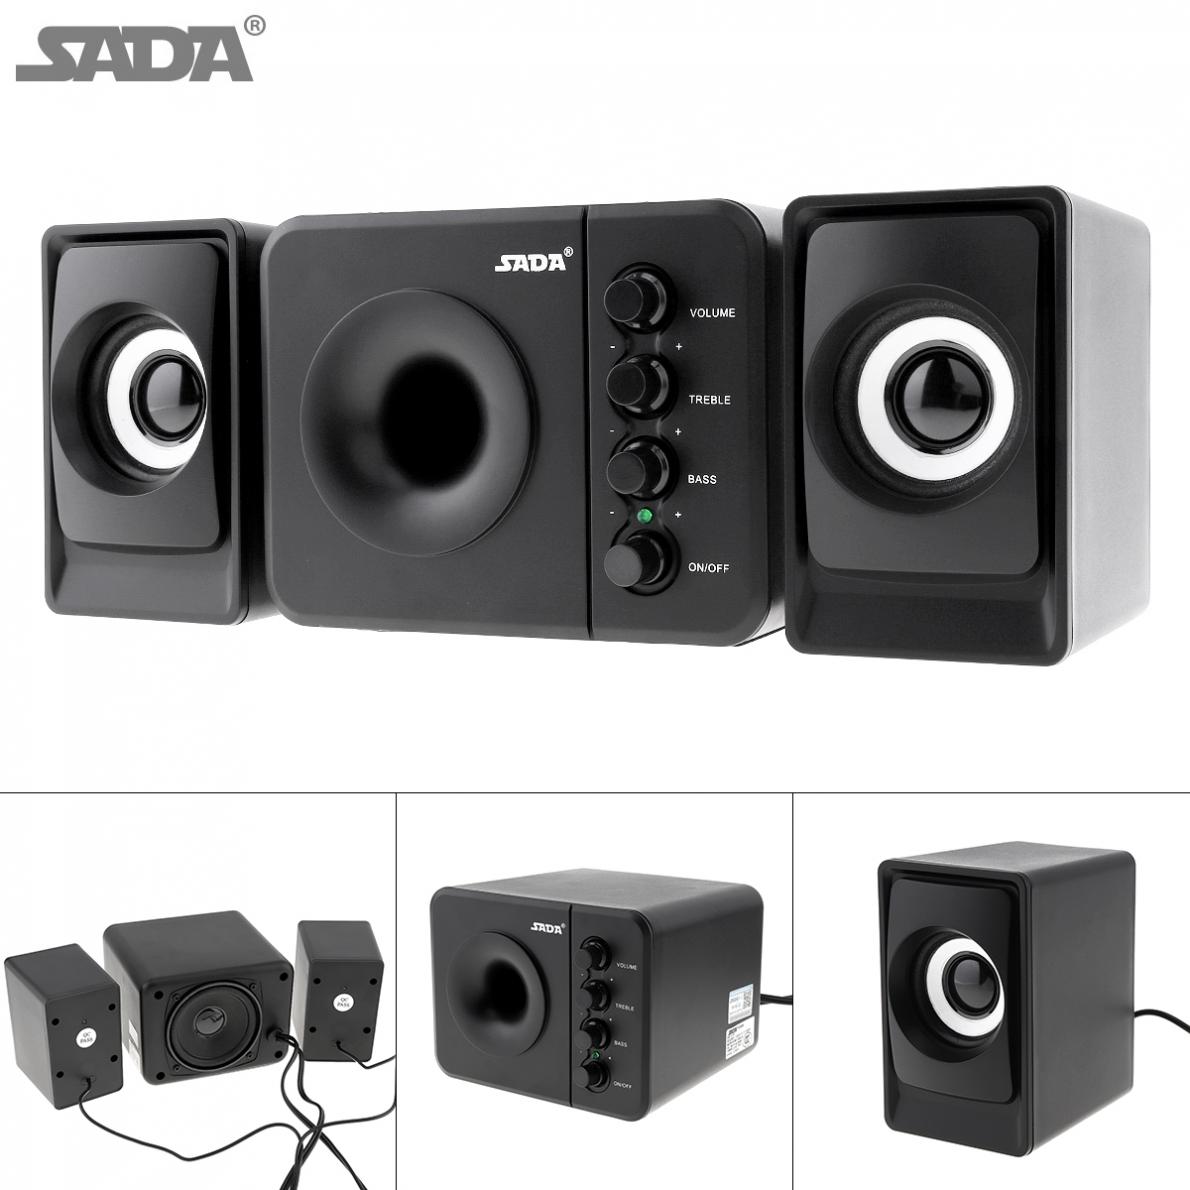 Portable USB2.0 Subwoofer Computer Speaker with 3.5mm Audio Plug and USB Power Plug for Desktop PC / Laptop / MP3 / Cellphone